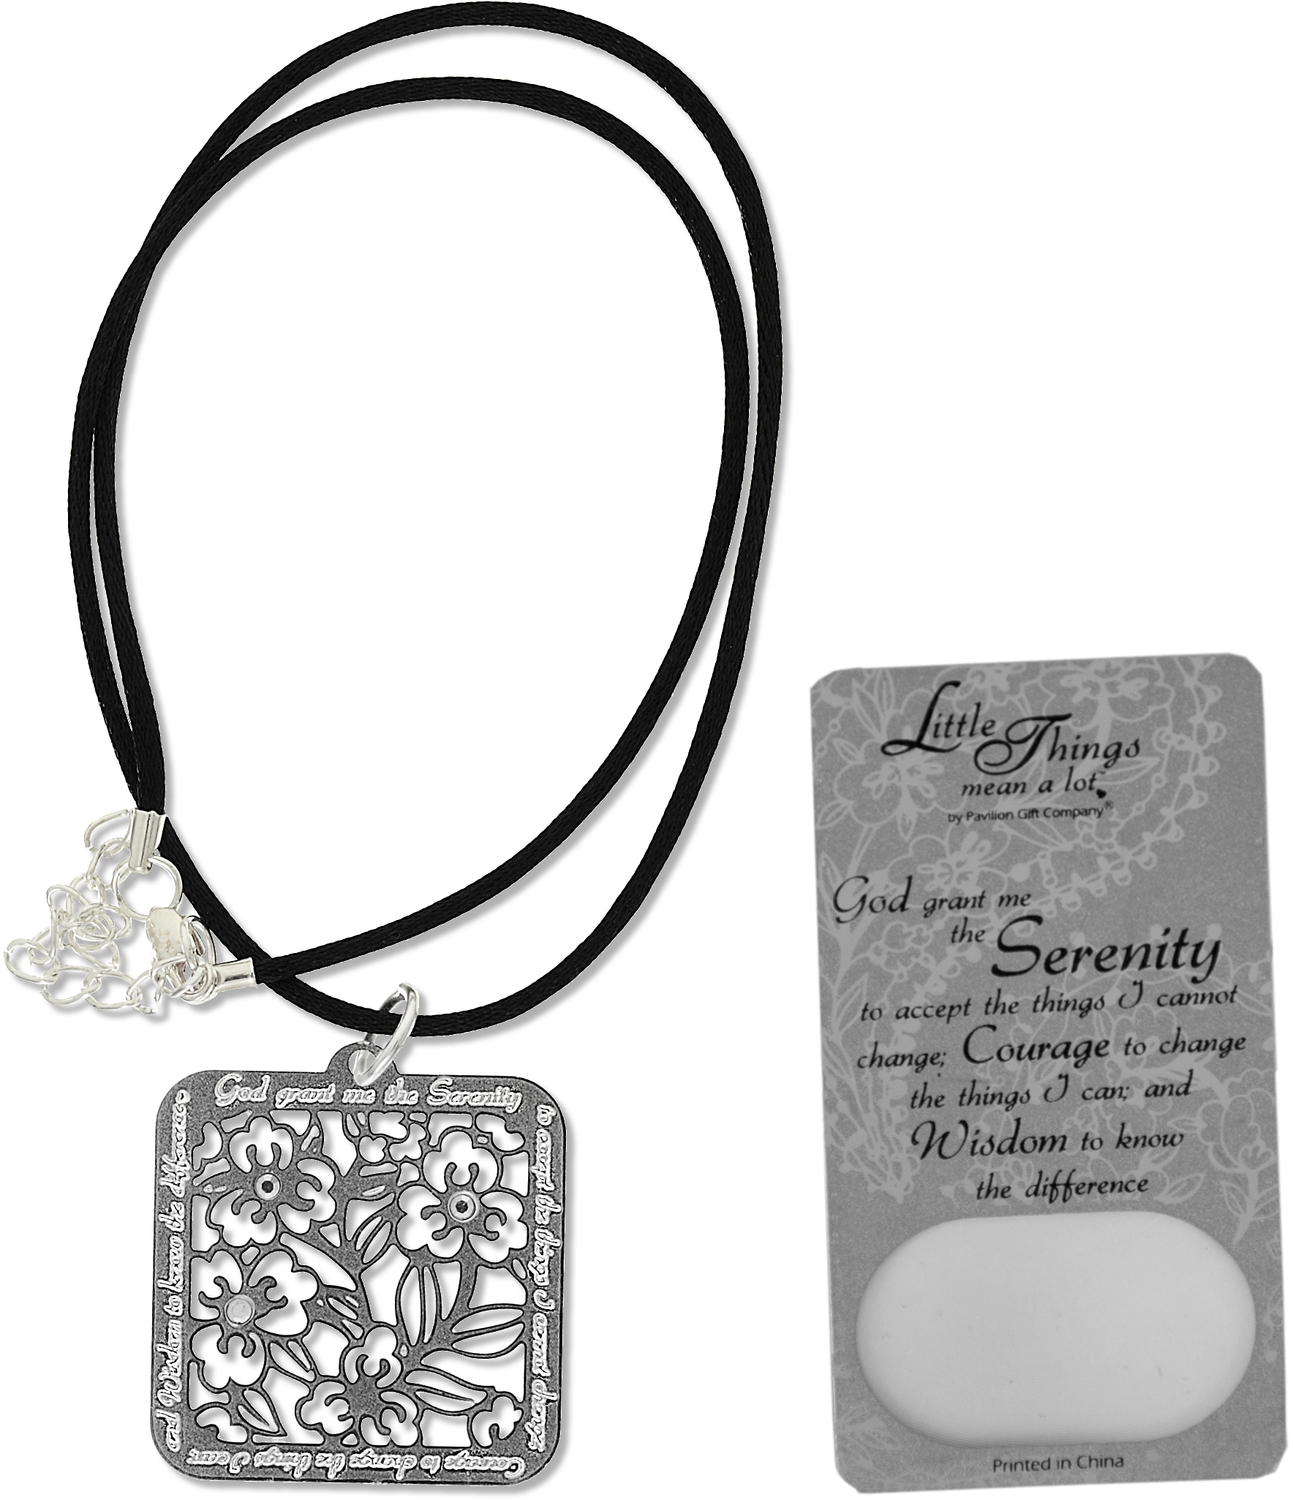 Serenity Necklace by Little Things Mean A Lot - Serenity Necklace - With 1.25" Square Pendant